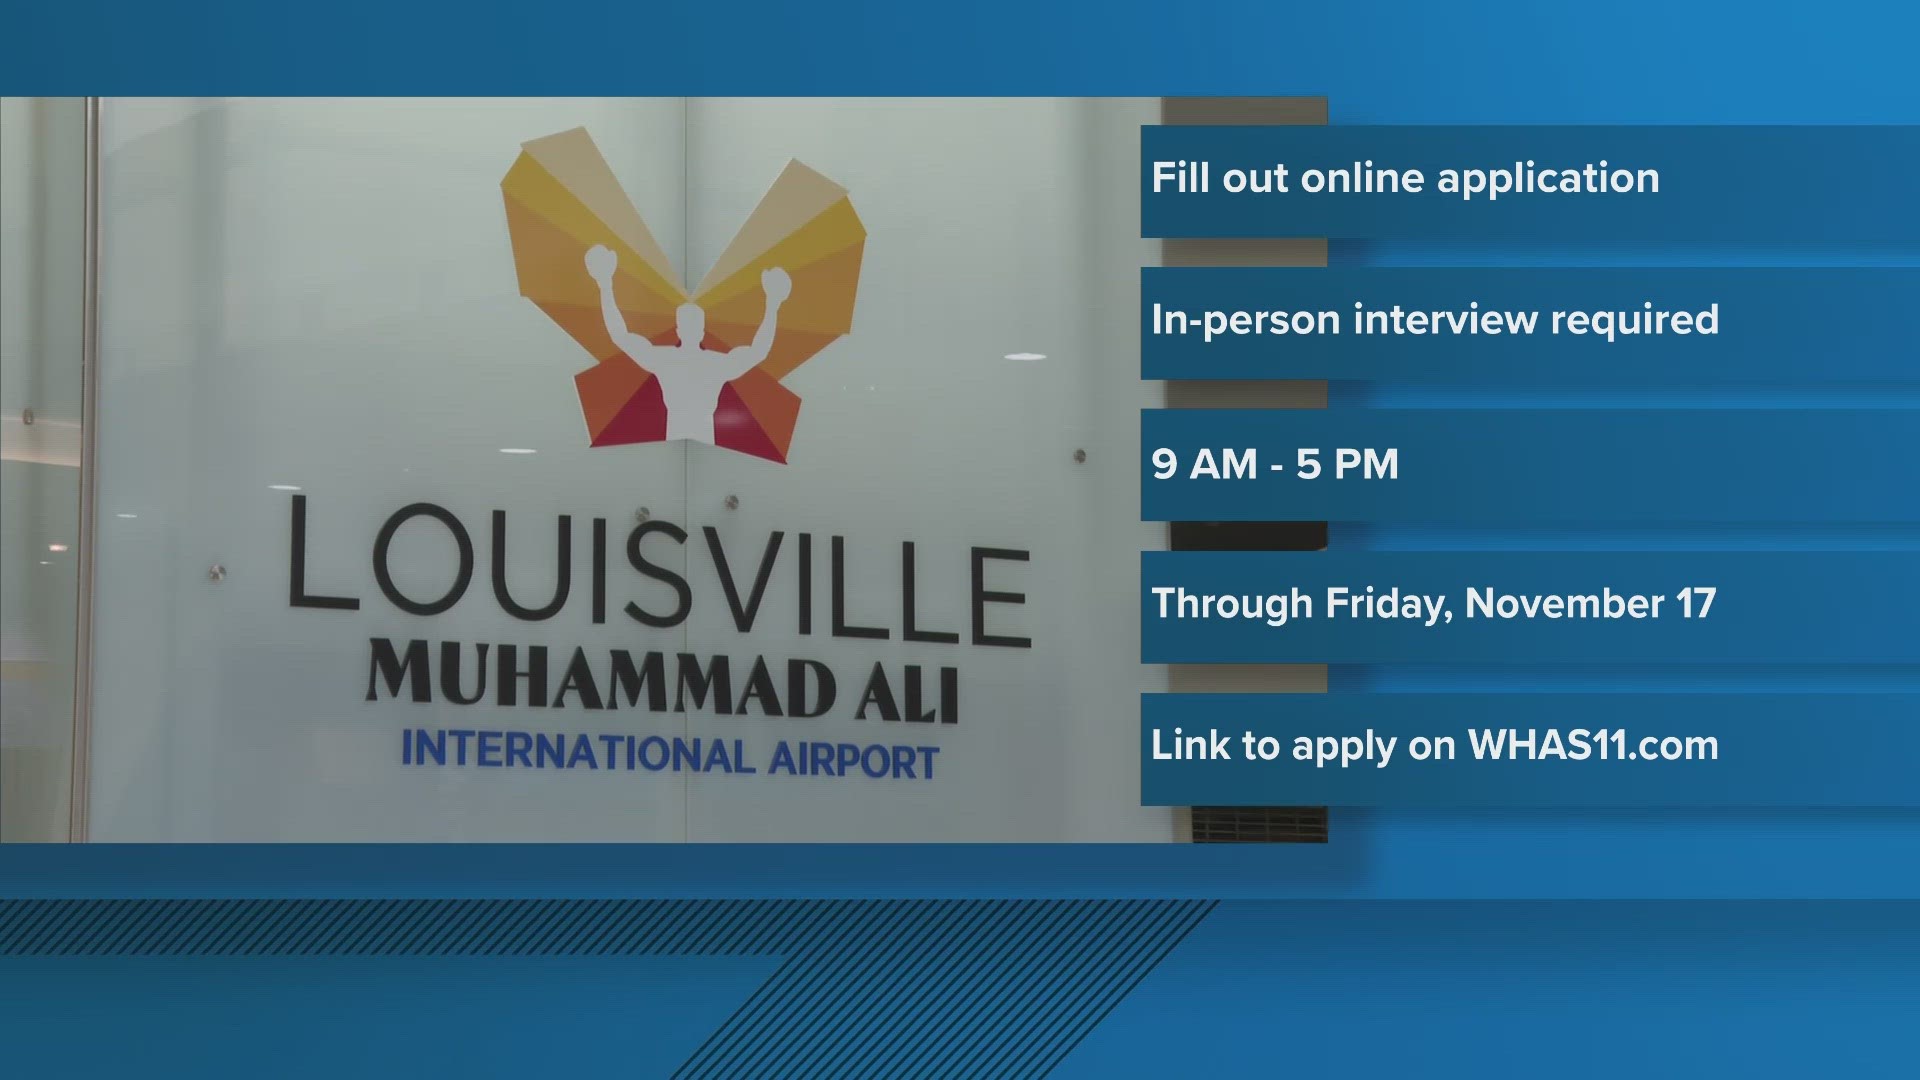 Travelers can sign up for appointments to get TSA PreCheck in Louisville from Nov. 6-17.